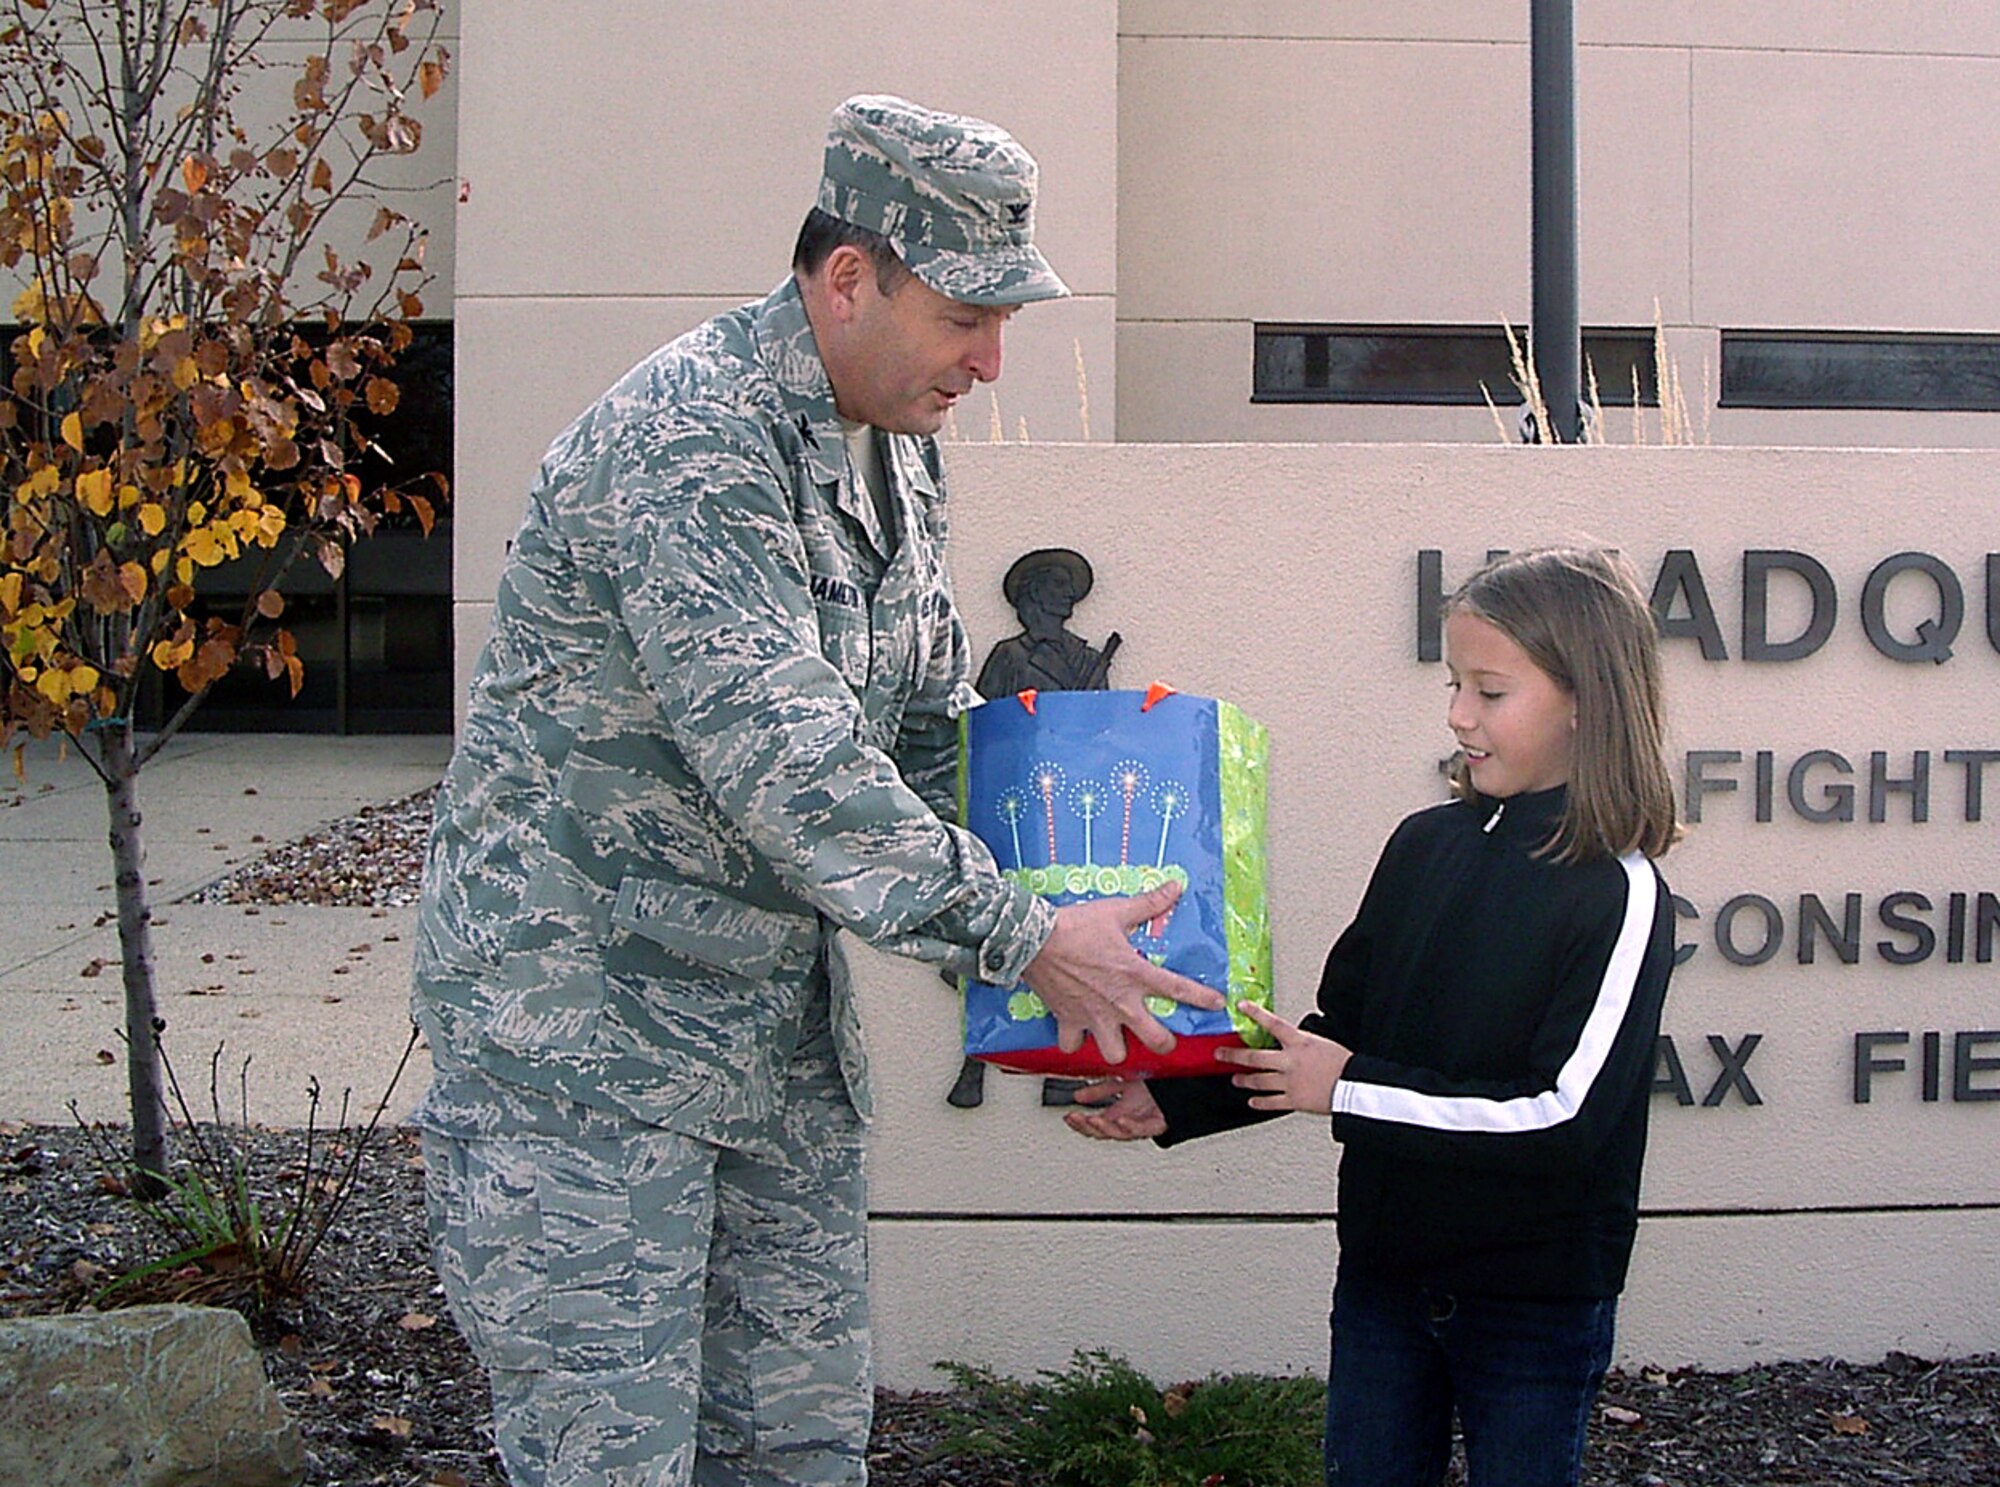 Col. Don Hamilton, Mission Support Group Commander at the 115th Fighter Wing in Madison, Wis., accepts a care package for the troops from Nichollette Volle (ten), daughter of unit member Tech Sgt. Brian Wyman and family readiness volunteer Shawna Wyman Nov. 12, 2009.  The gift was part of a larger donation from Nichollette, who recently asked her birthday party guests to bring items for the troops in lieu of a birthday present for her. The 115th FW family program's Care Packages for Troops volunteers recently assembled over 30 packages to send to unit members who will be deployed over the holidays.  (U.S. Air Force Photo by Master Sgt. Jeff Reese)